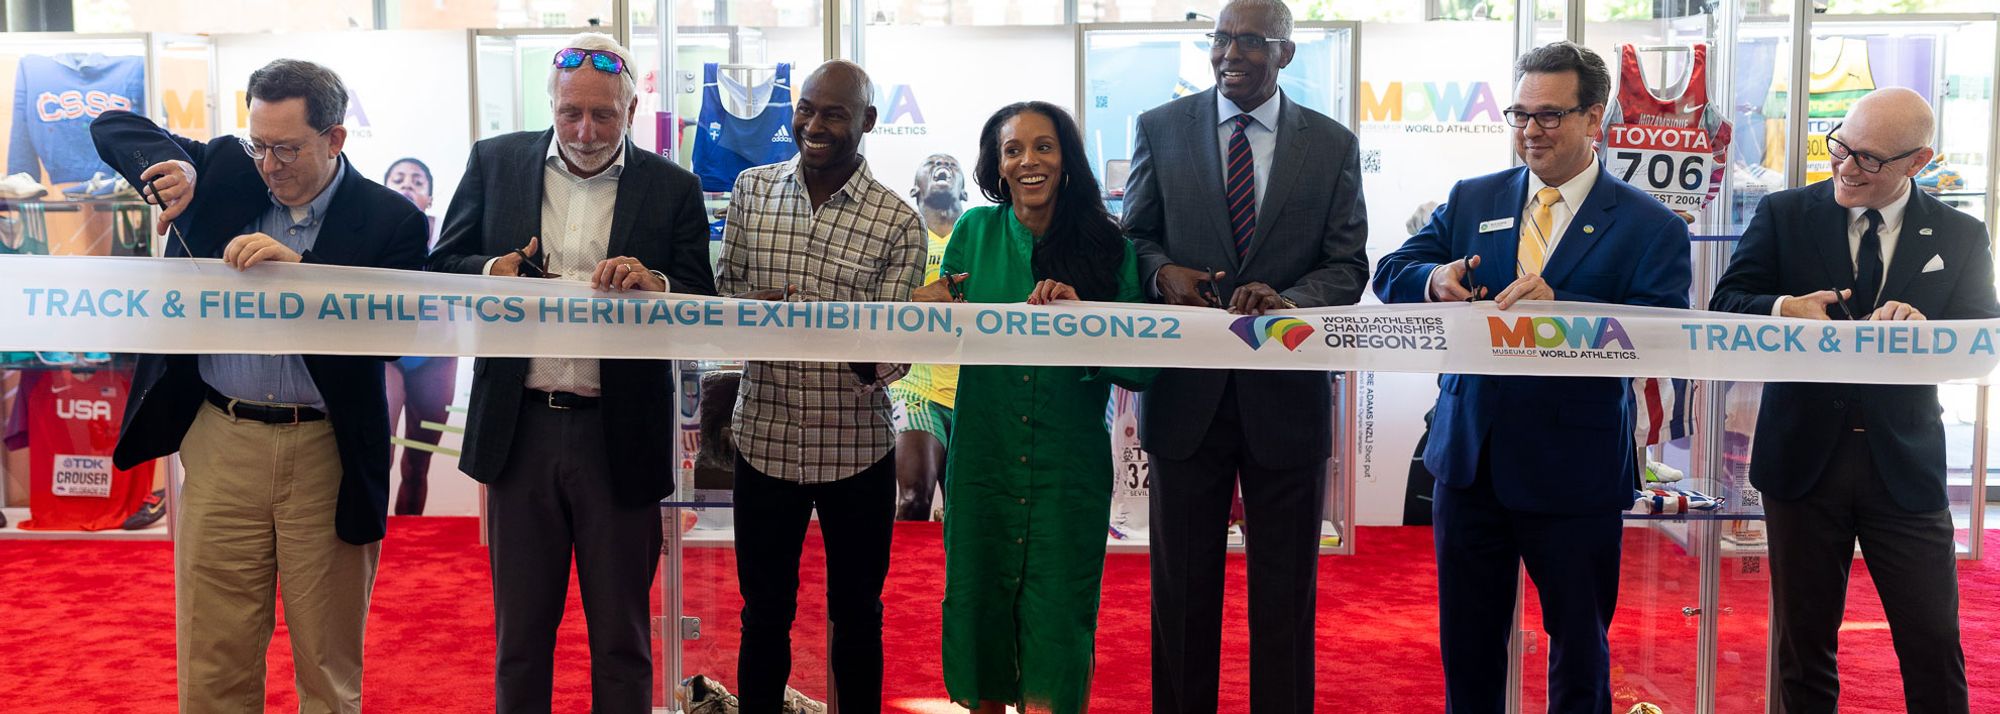 The MOWA Track & Field Heritage Exhibition Oregon22 has launched at the University of Oregon